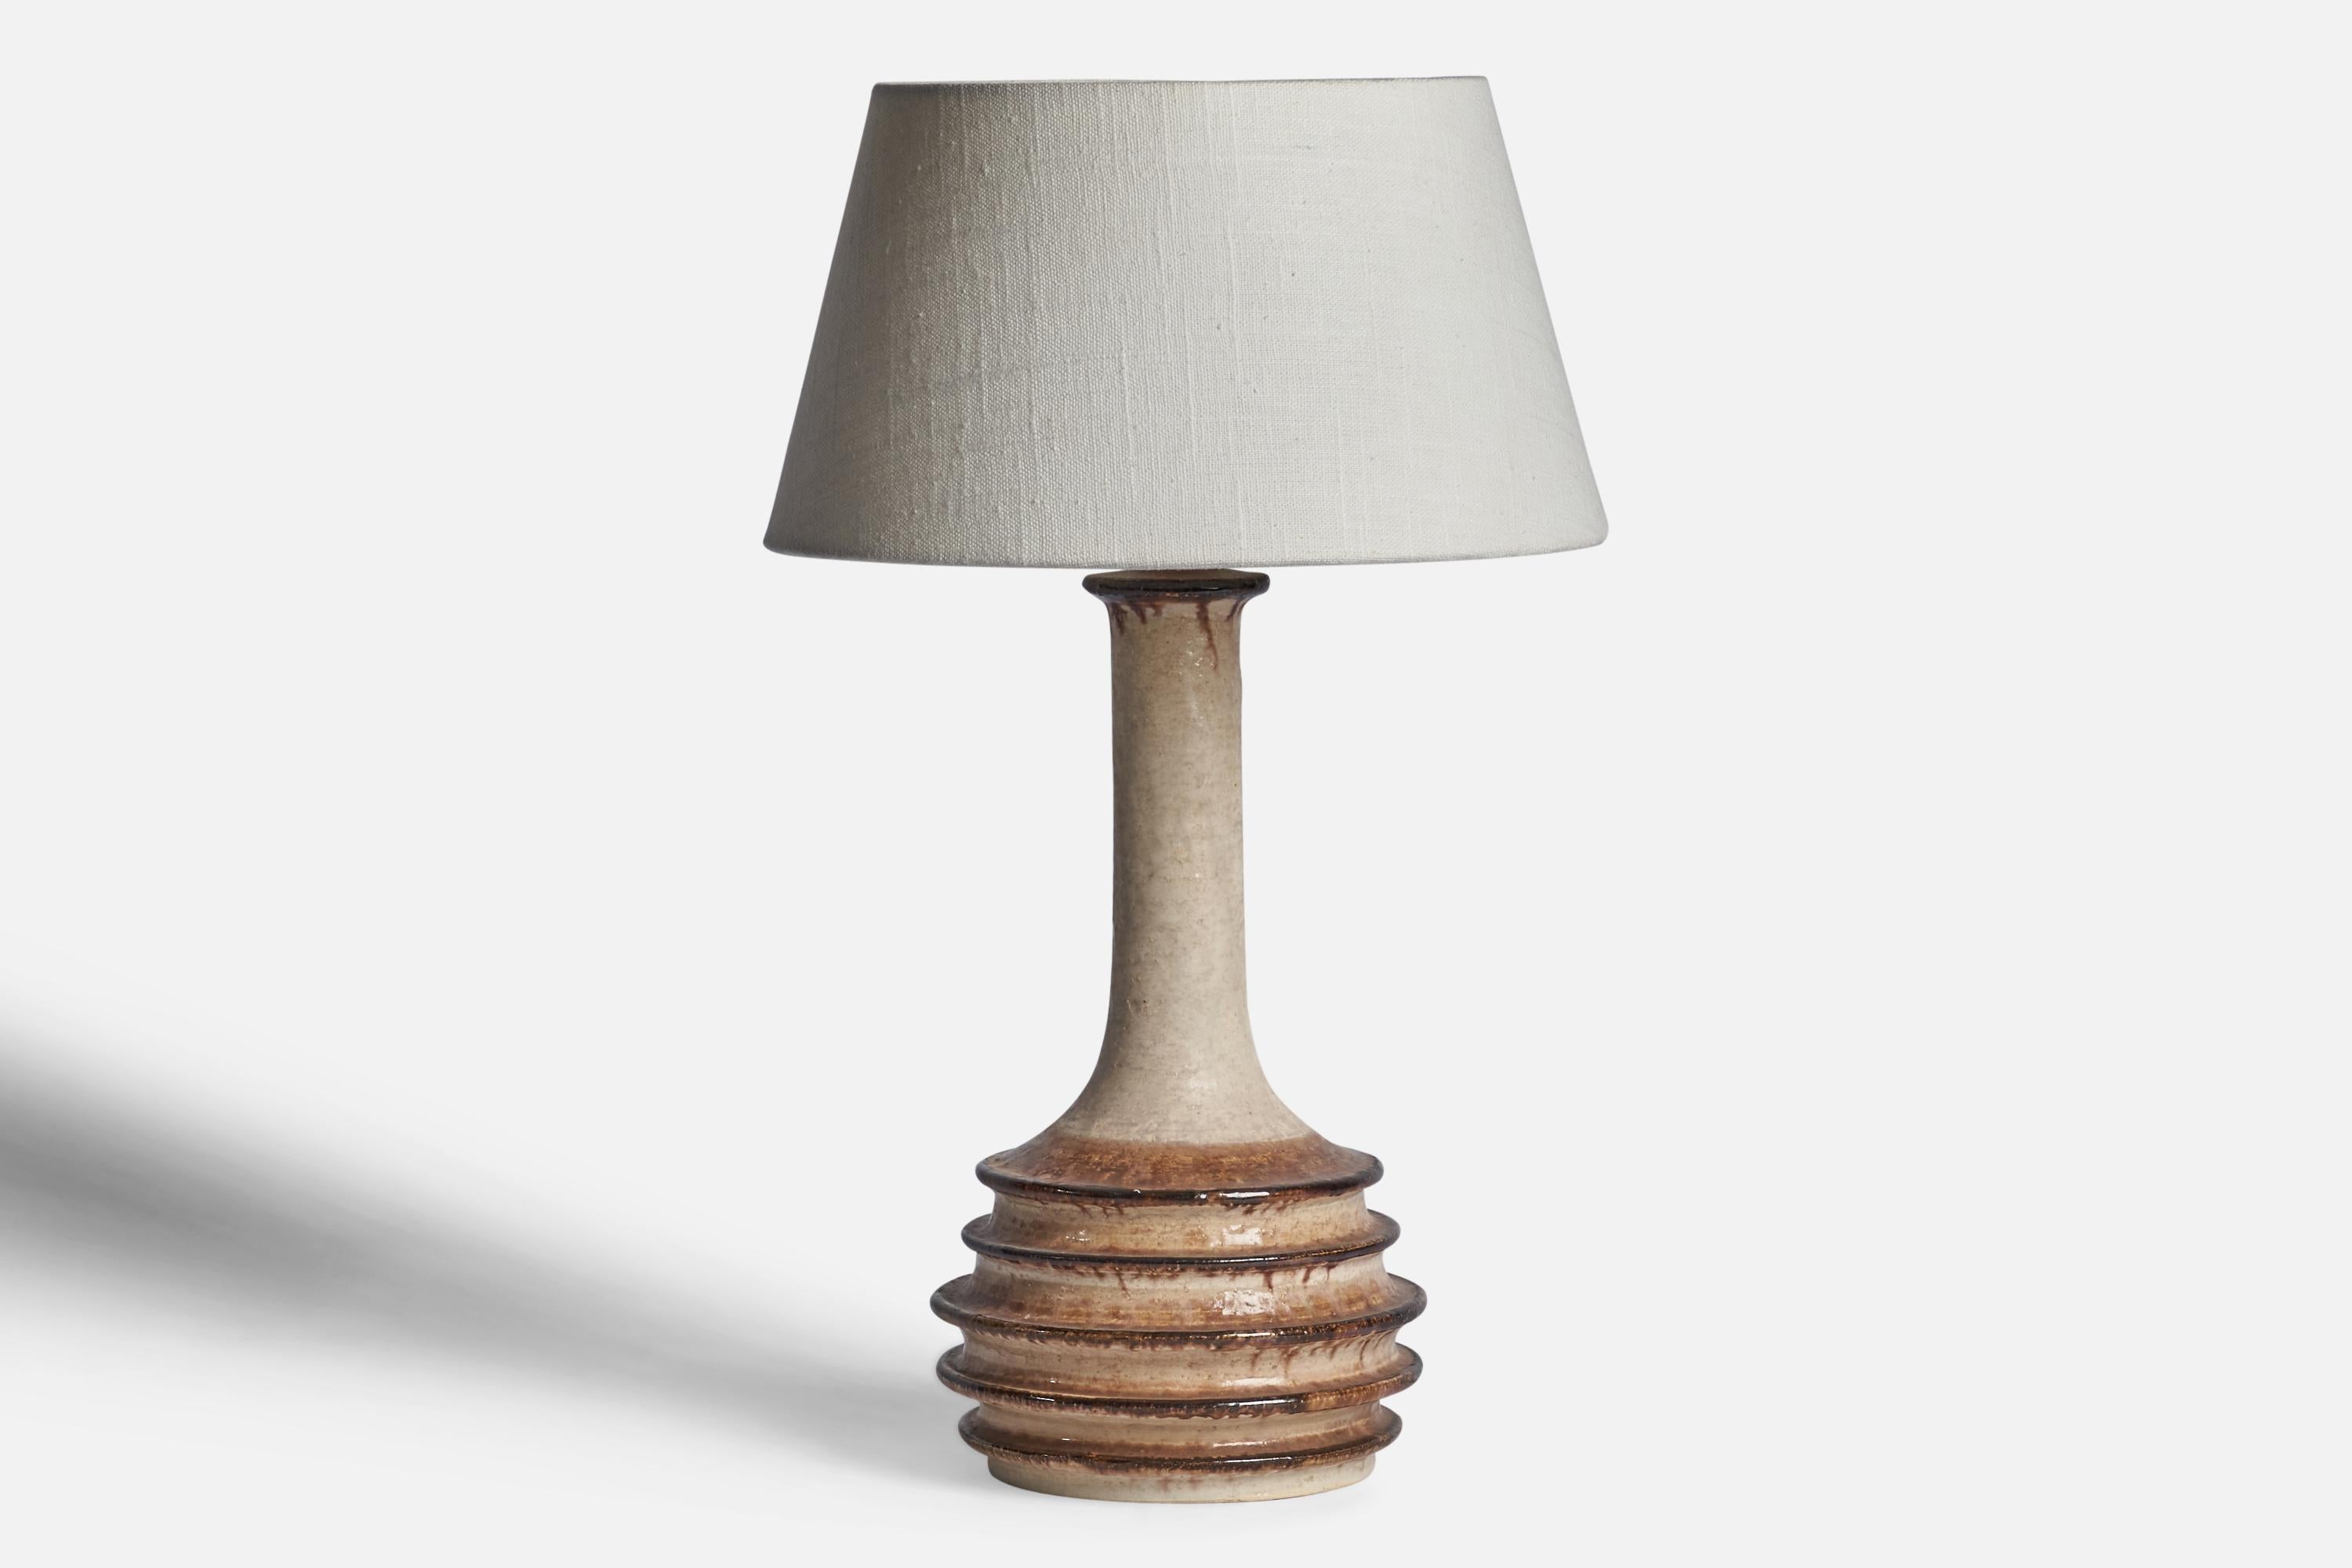 A white and brown-glazed stoneware table lamp designed Jette Hellerøe and produced by Axella, Denmark, 1960s.

Dimensions of Lamp (inches): 13.5” H x 6” Diameter
Dimensions of Shade (inches): 7” Top Diameter x 10” Bottom Diameter x